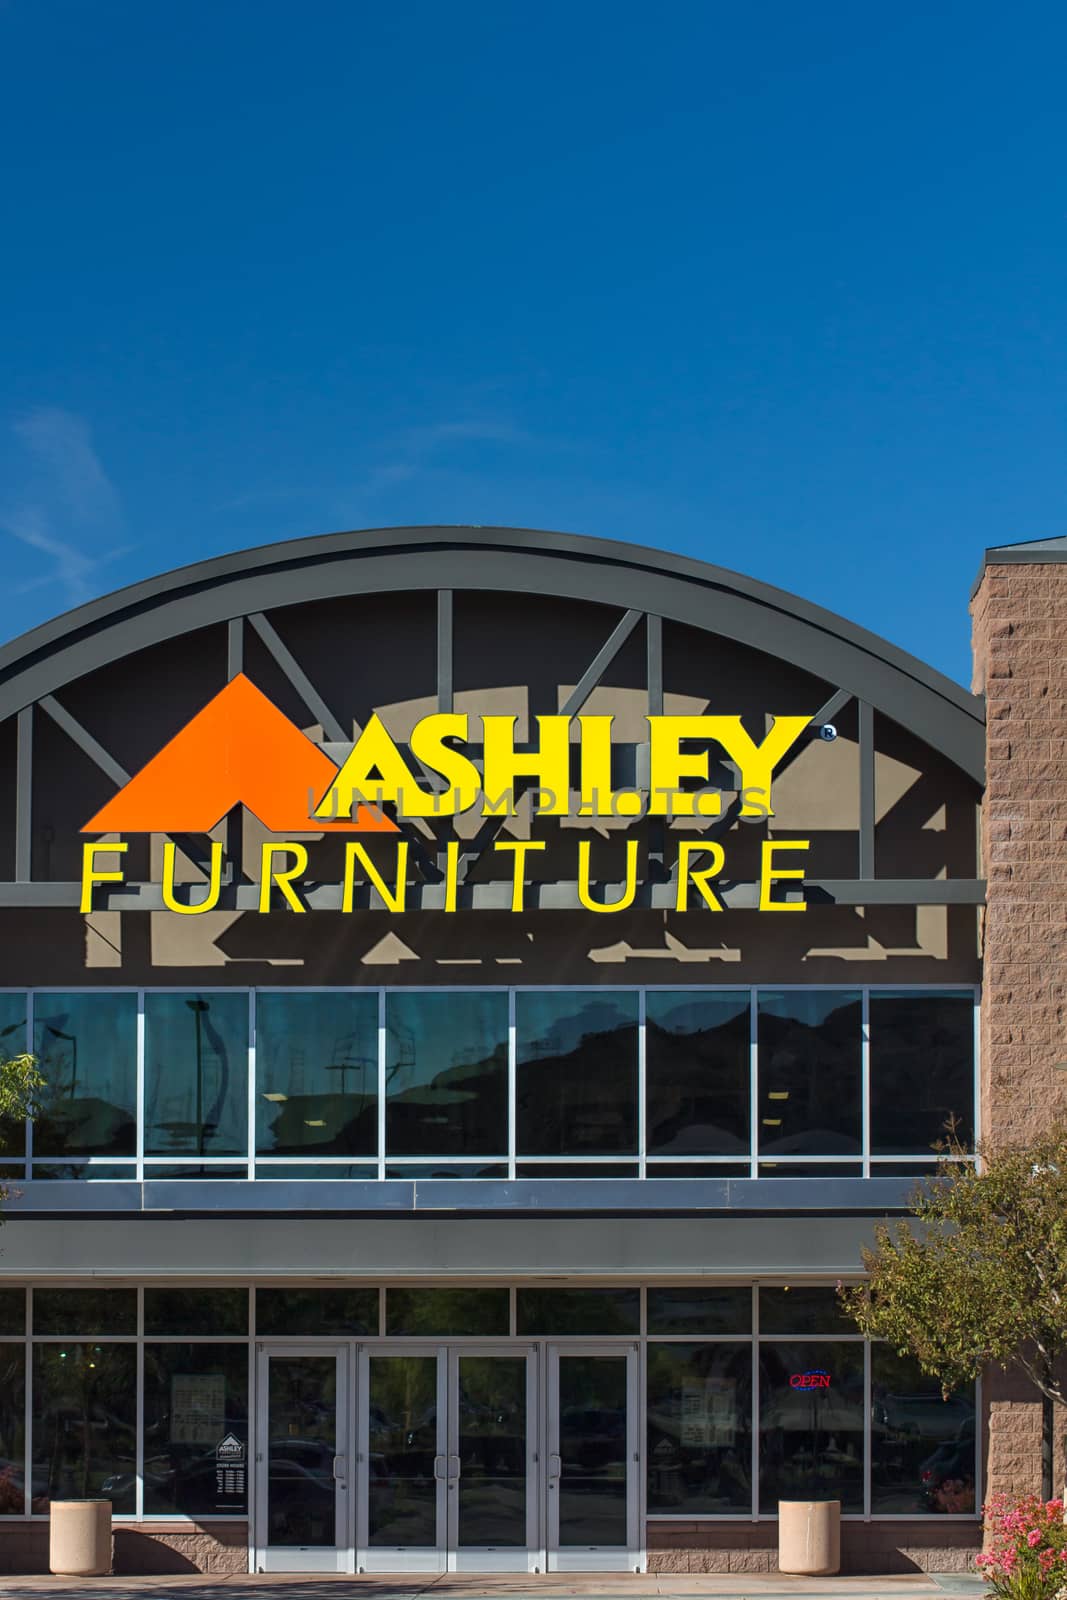 SANTA CLARITA, CA/USA - NOVEMBER 8, 2014:  Ashley Furniture store exterior. Ashley Furniture is a furniture company that manufactures and distributes home furniture products throughout the world.